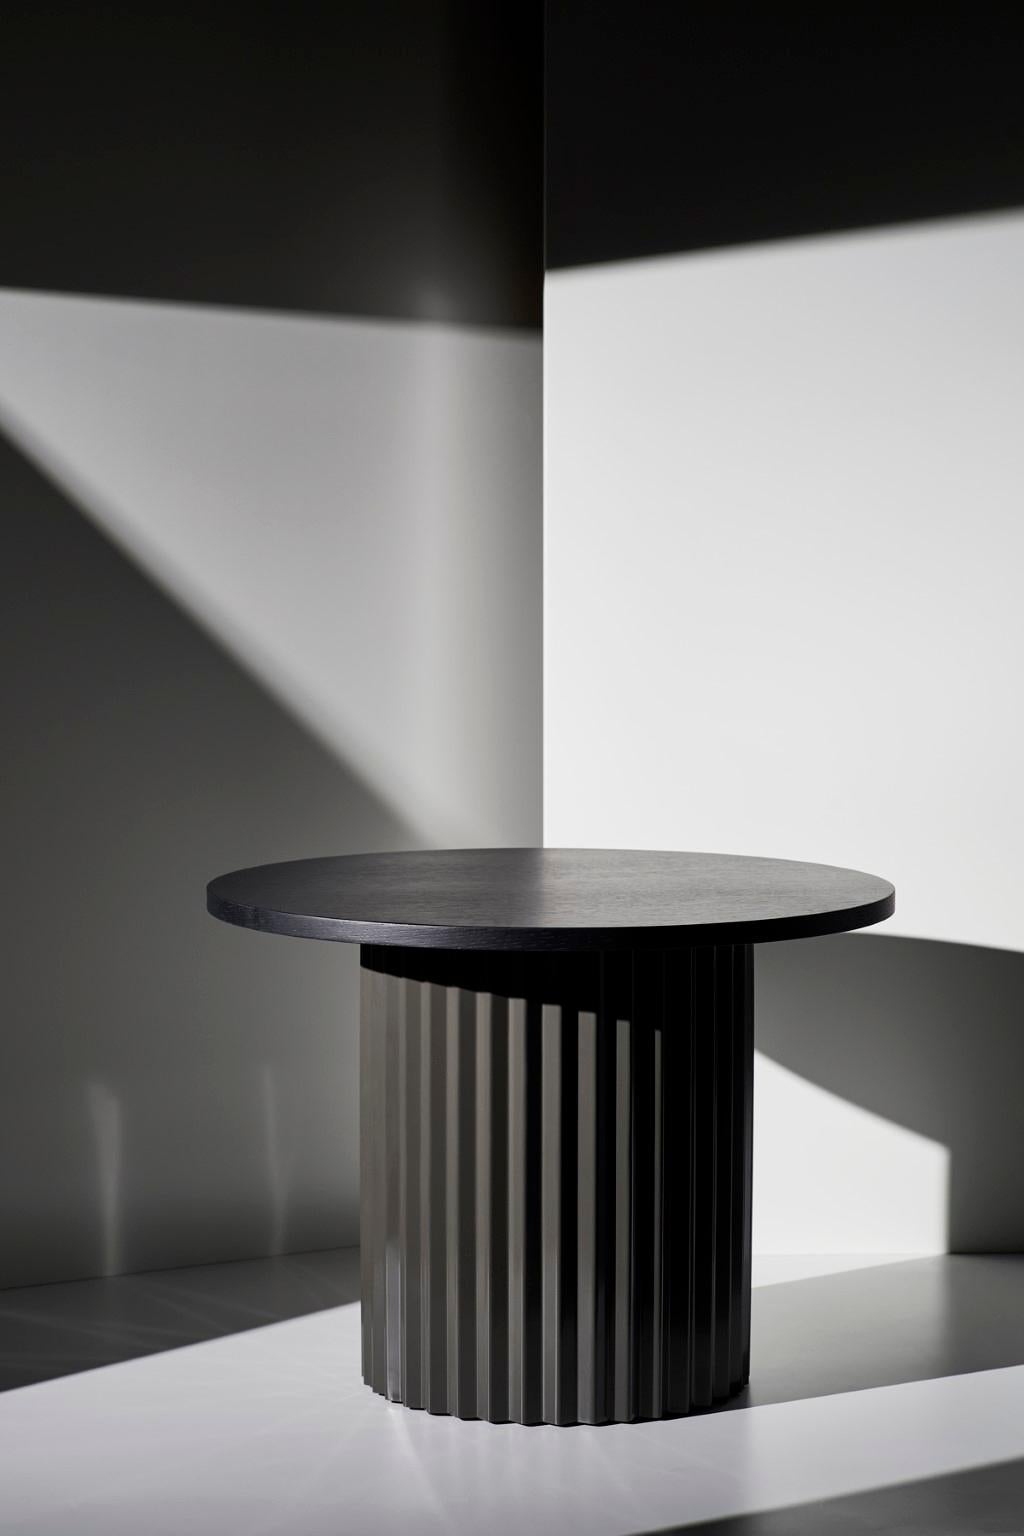 Oak table 60 by Lisette Rützou
Dimensions: D 60 x H 41 cm
Materials: Oak tabletop 
Also available Ø 40

 Lisette Rützou’s design is motivated by an urge to articulate a story. Inspired by the beauty of materials, form and architecture, each